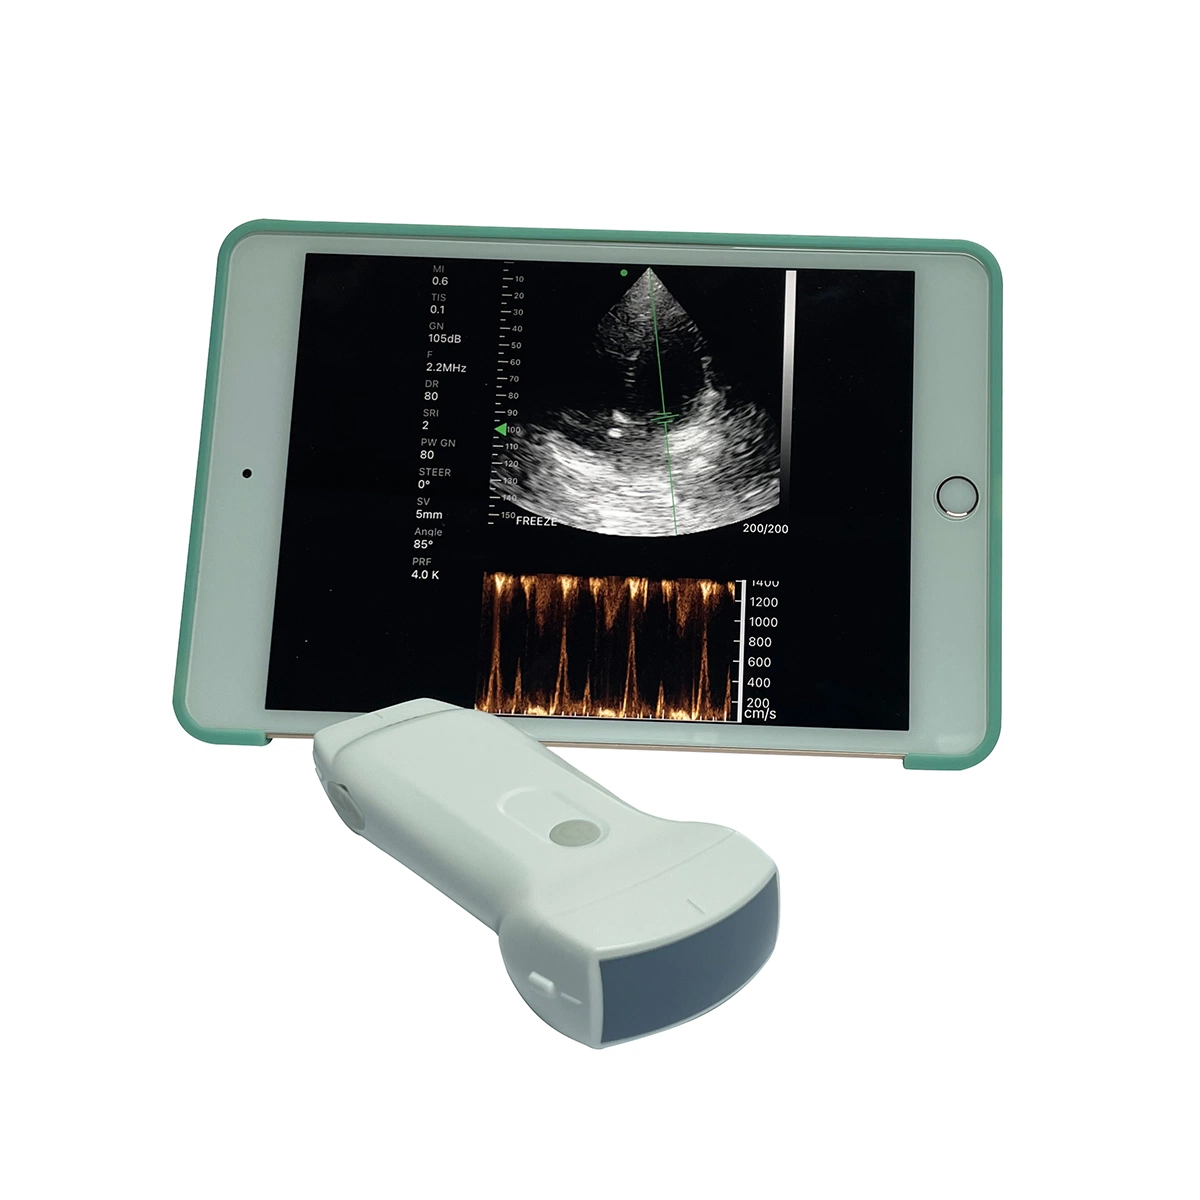 Wireless Android Ultrasound Probe WiFi USB Ultrasound Convex Linear Phased Array Doppler Probe for Pregnancy Price